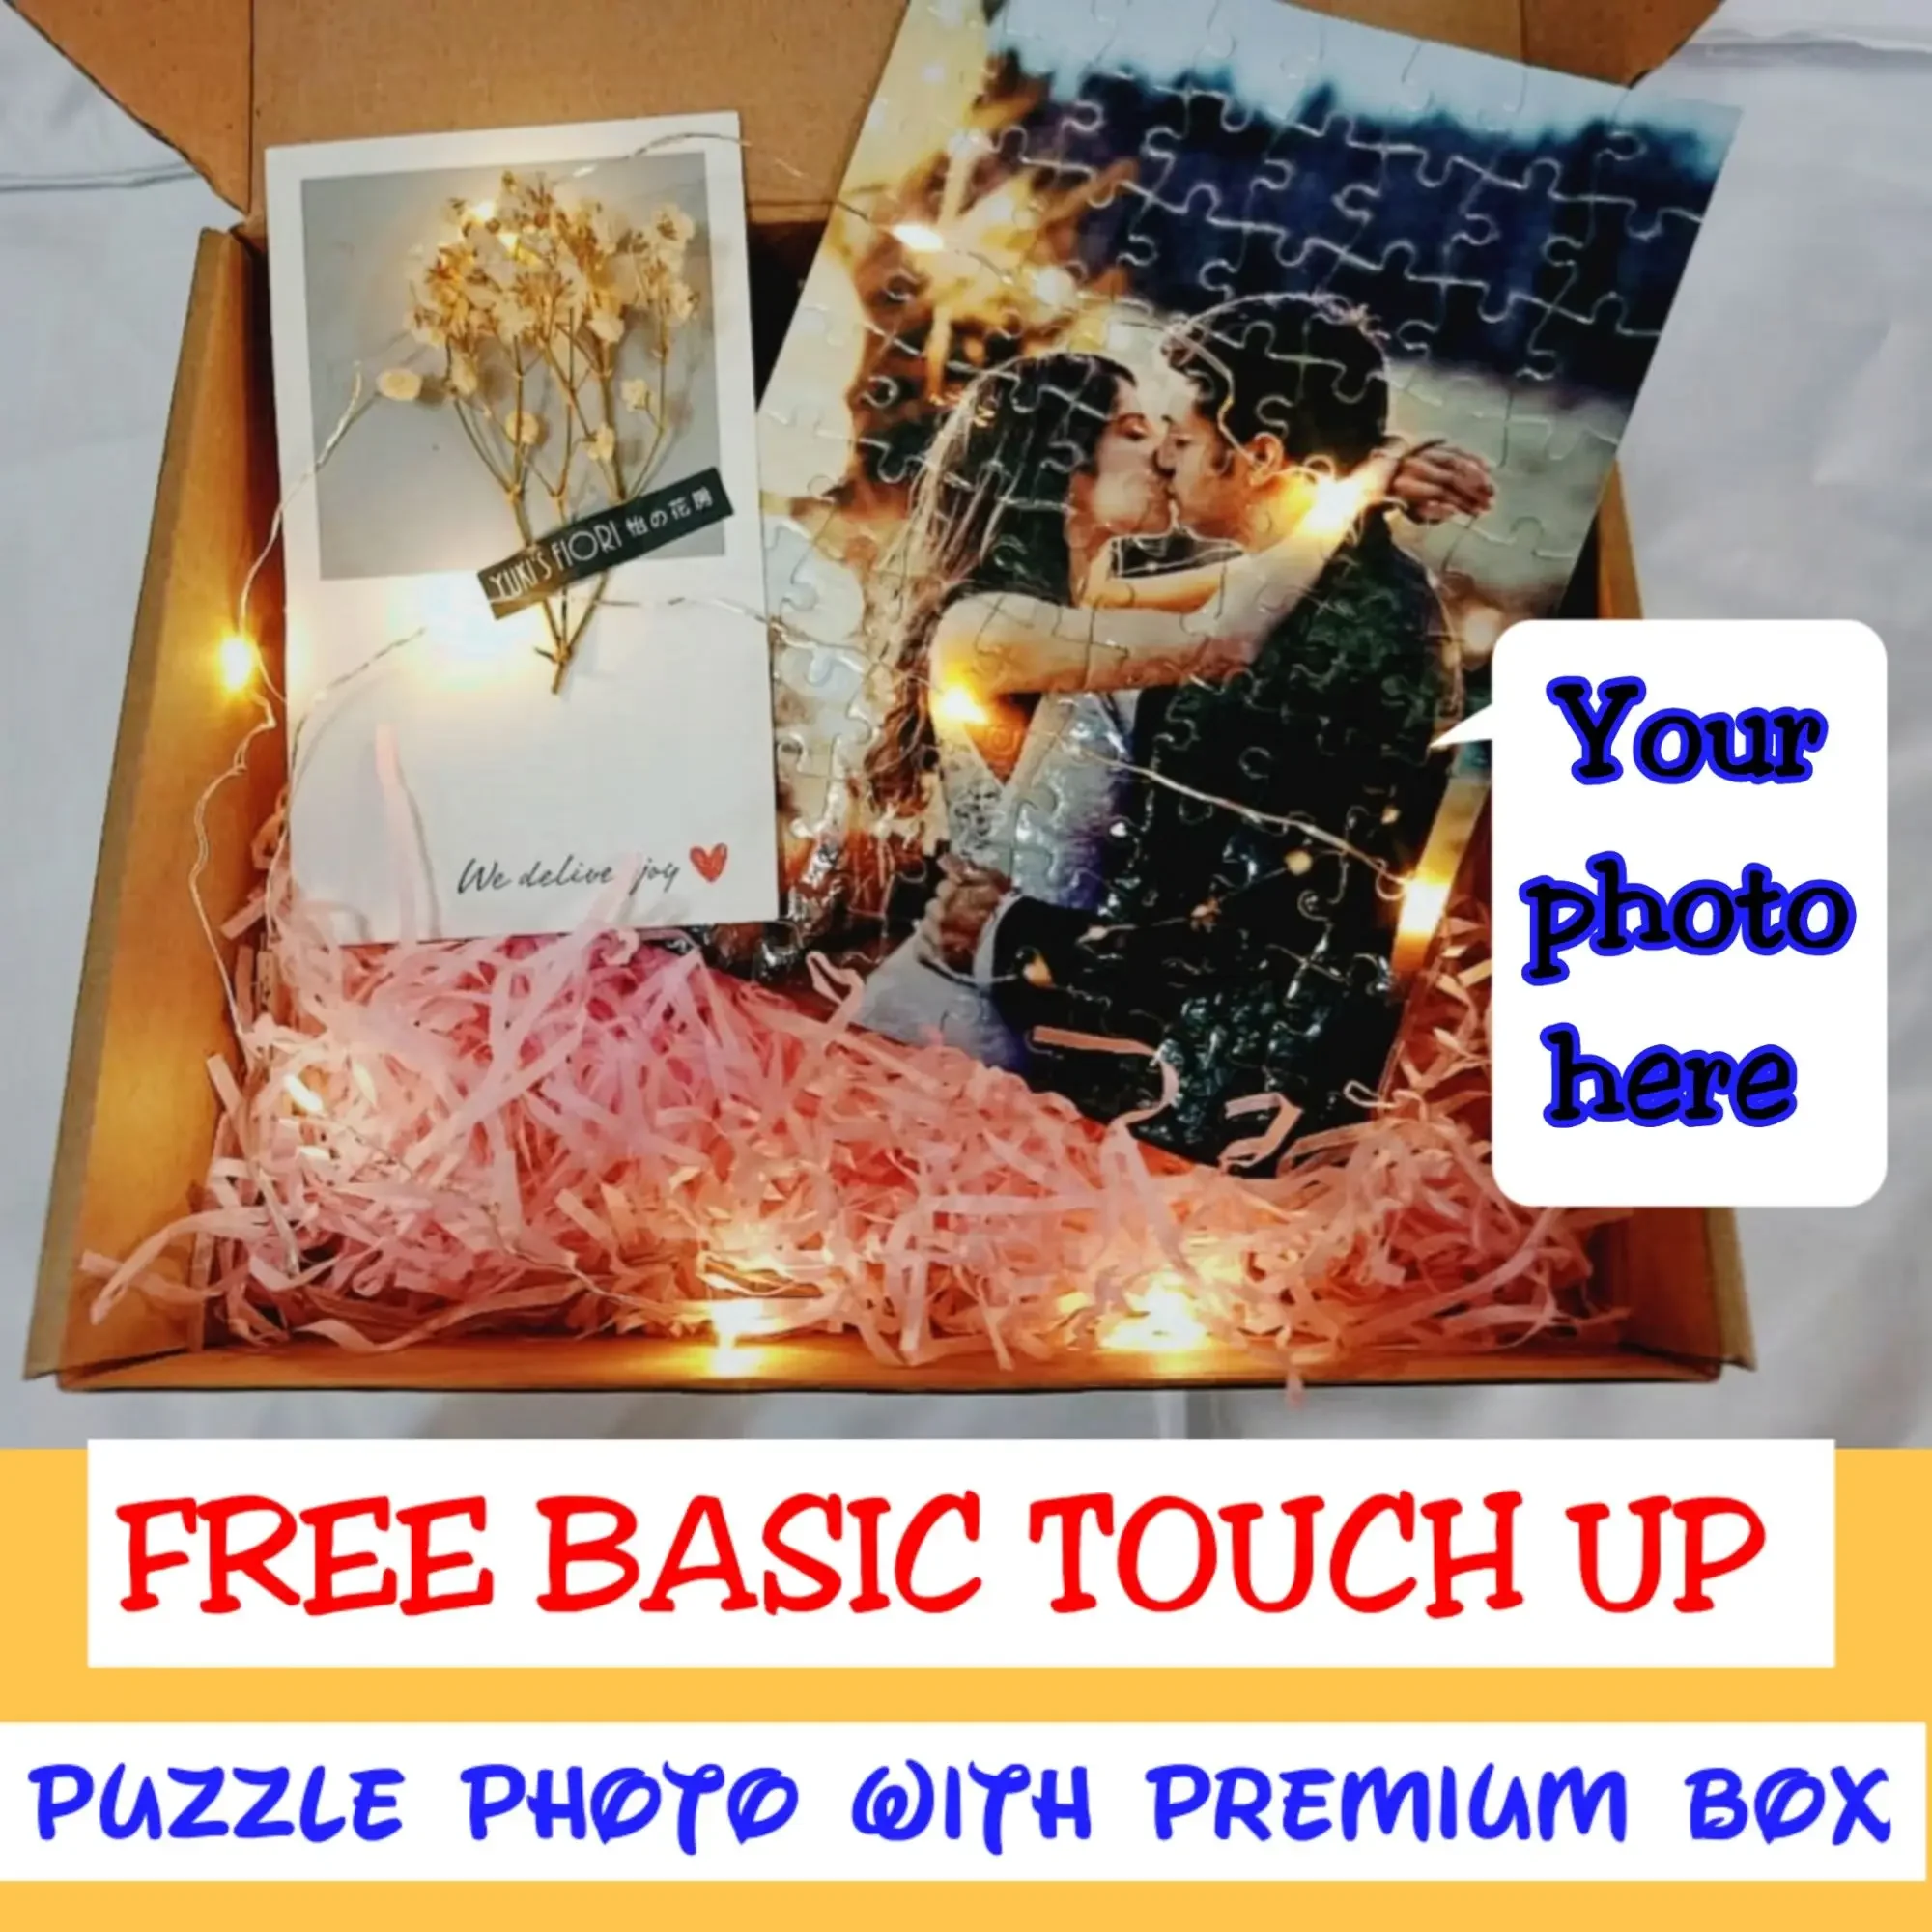 🌺DIY CUSTOM MADE A4/A5 PHOTO PUZZLE WITH Decorations🌺 Jigsaw Gift for her/him unqiue gift lovely